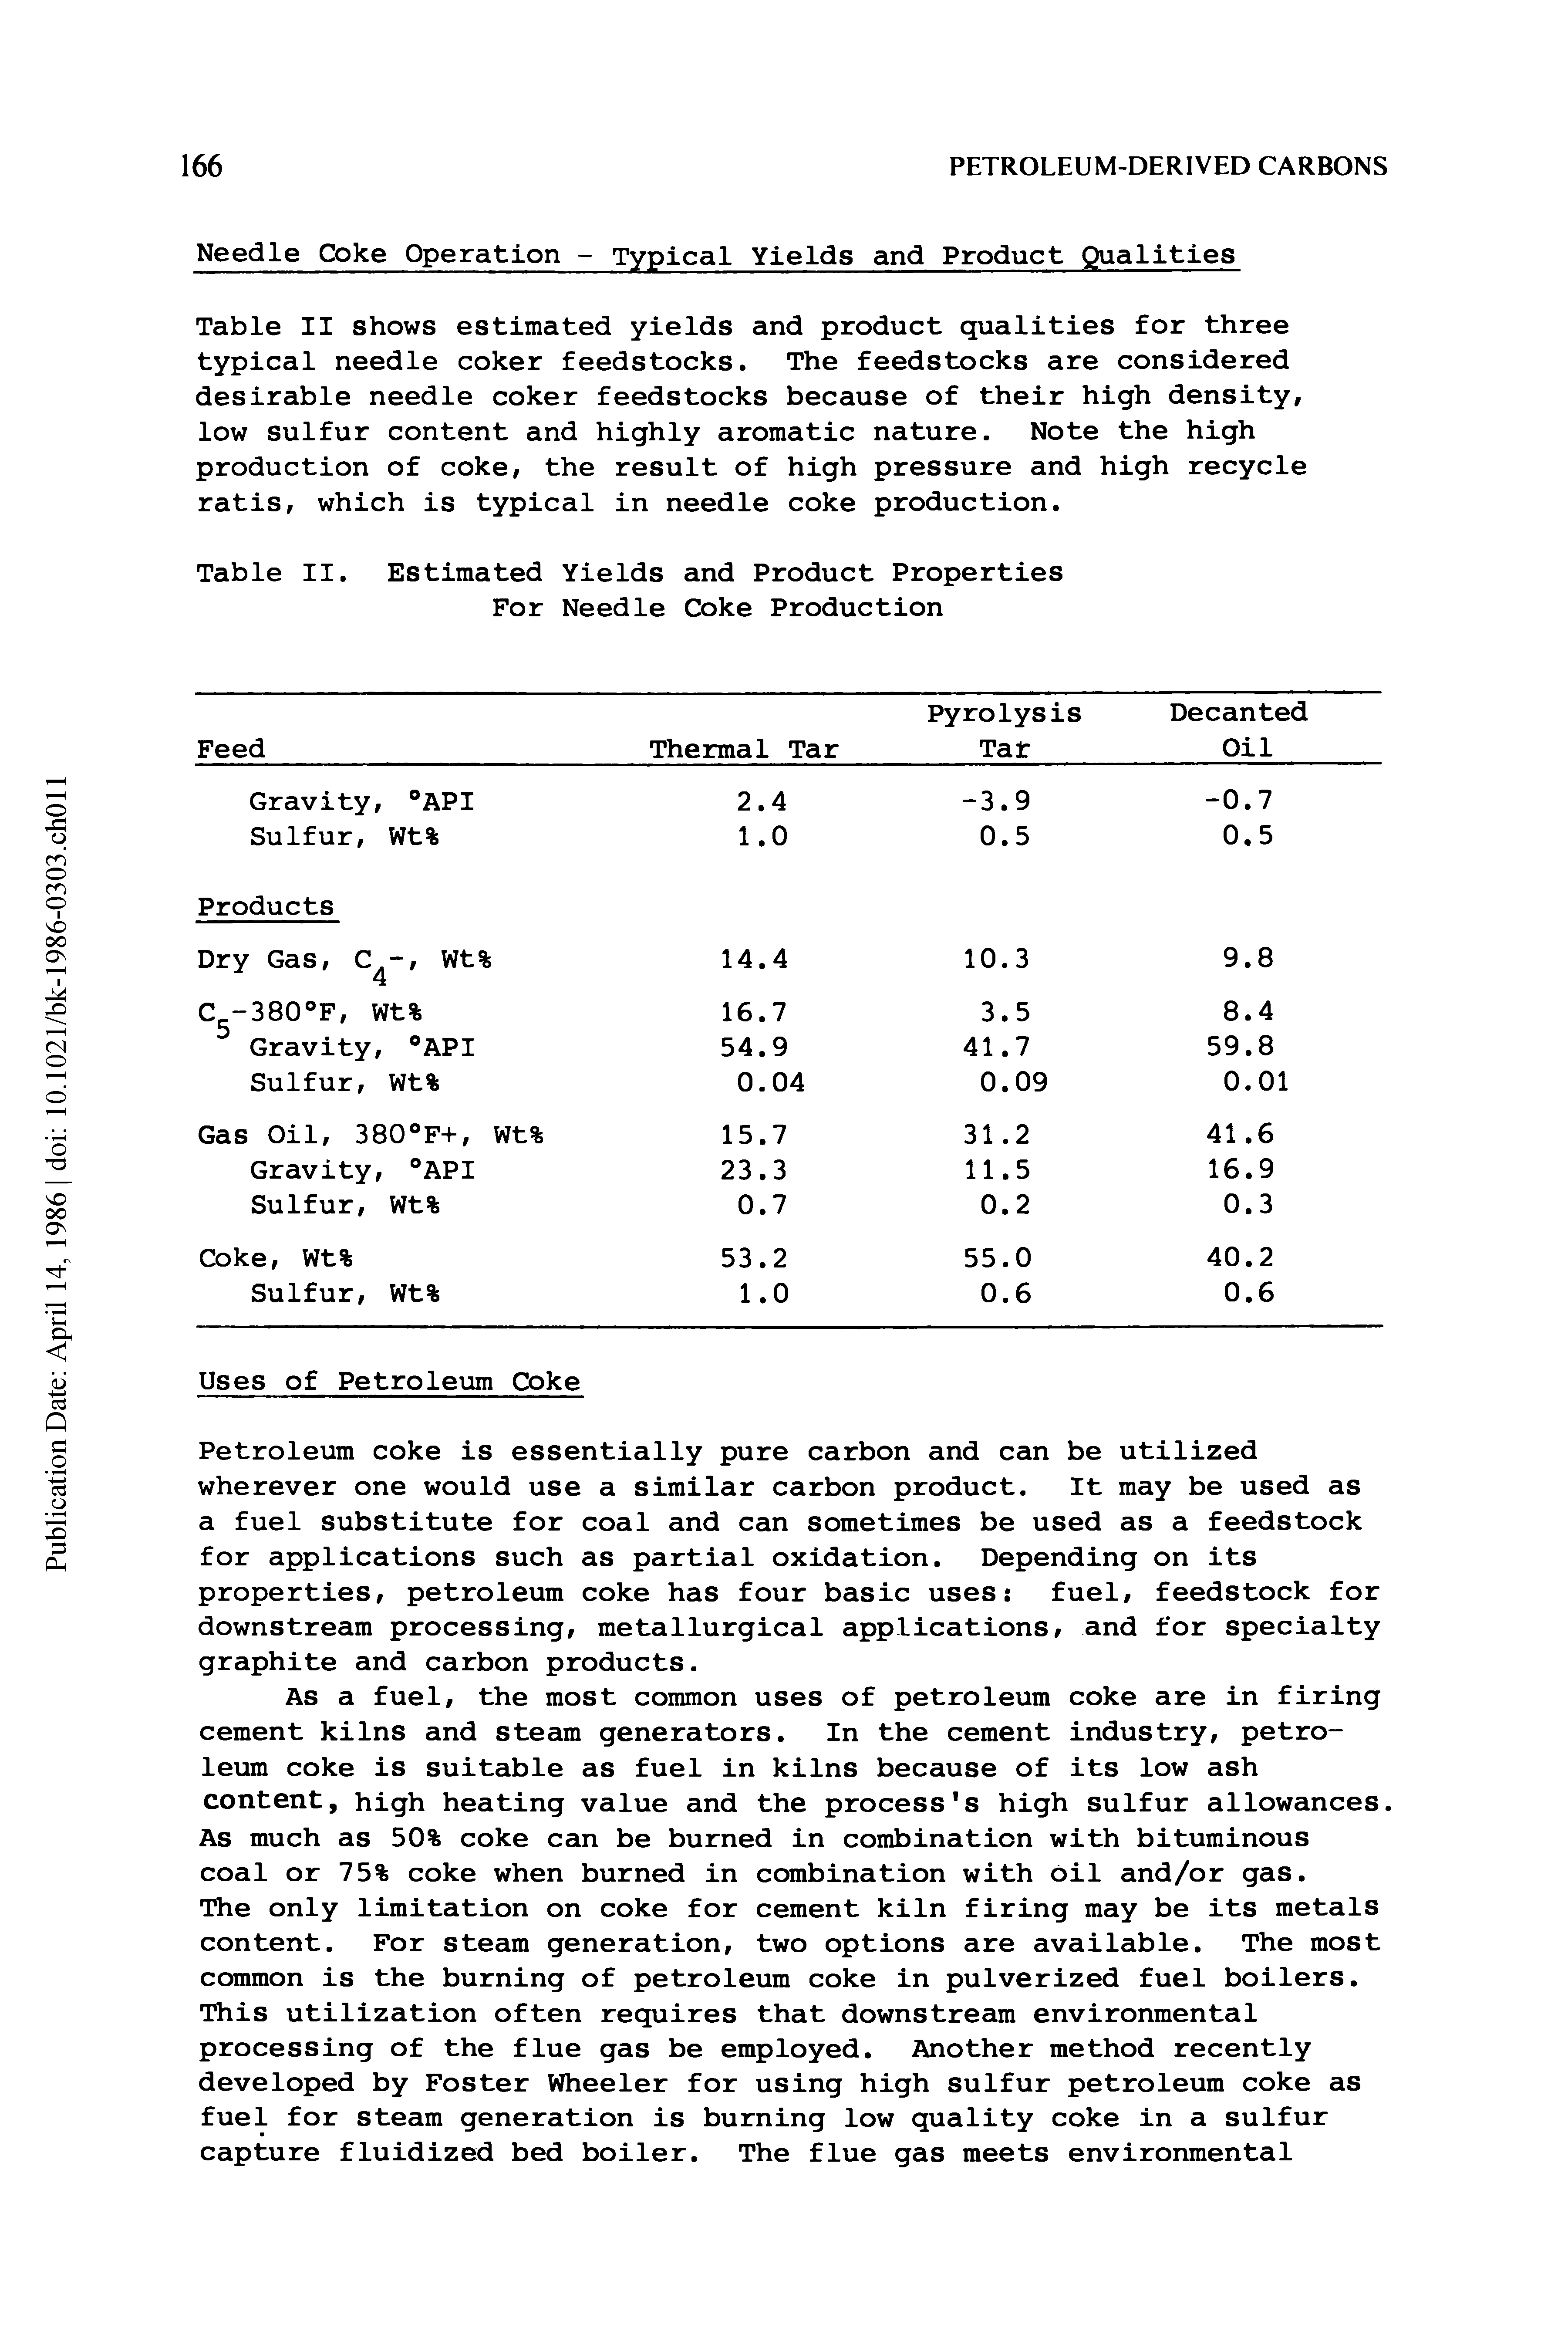 Table II shows estimated yields and product qualities for three typical needle coker feedstocks. The feedstocks are considered desirable needle coker feedstocks because of their high density, low sulfur content and highly aromatic nature. Note the high production of coke, the result of high pressure and high recycle ratis, which is typical in needle coke production.